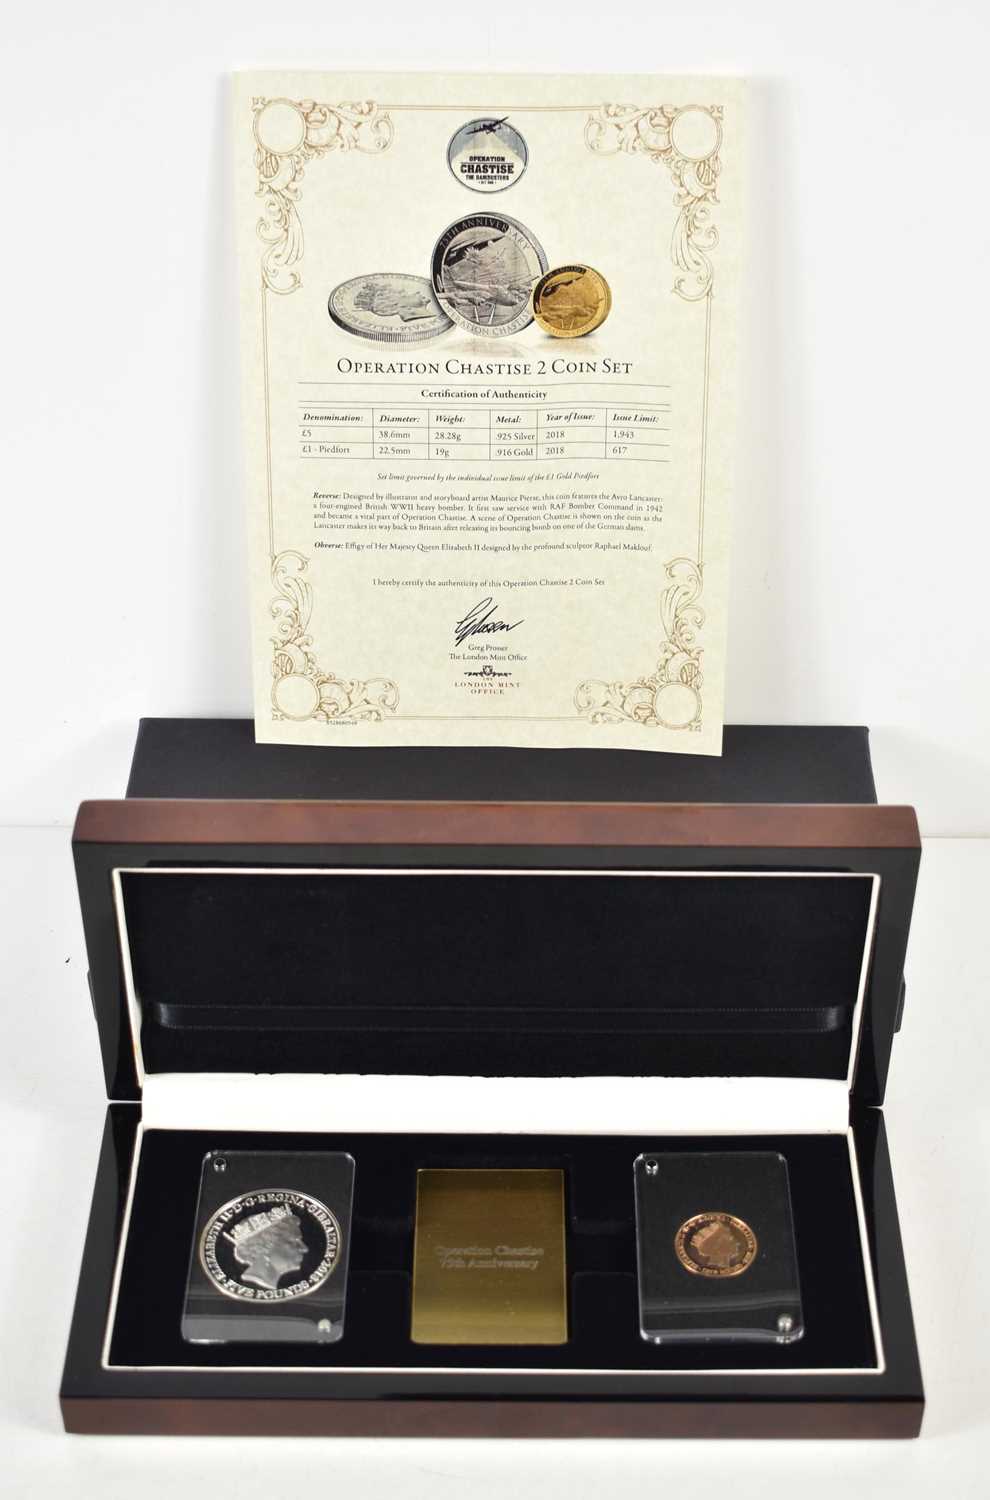 A London Mint Operation Chastise gold and silver coins set, limited edition, the set containing a